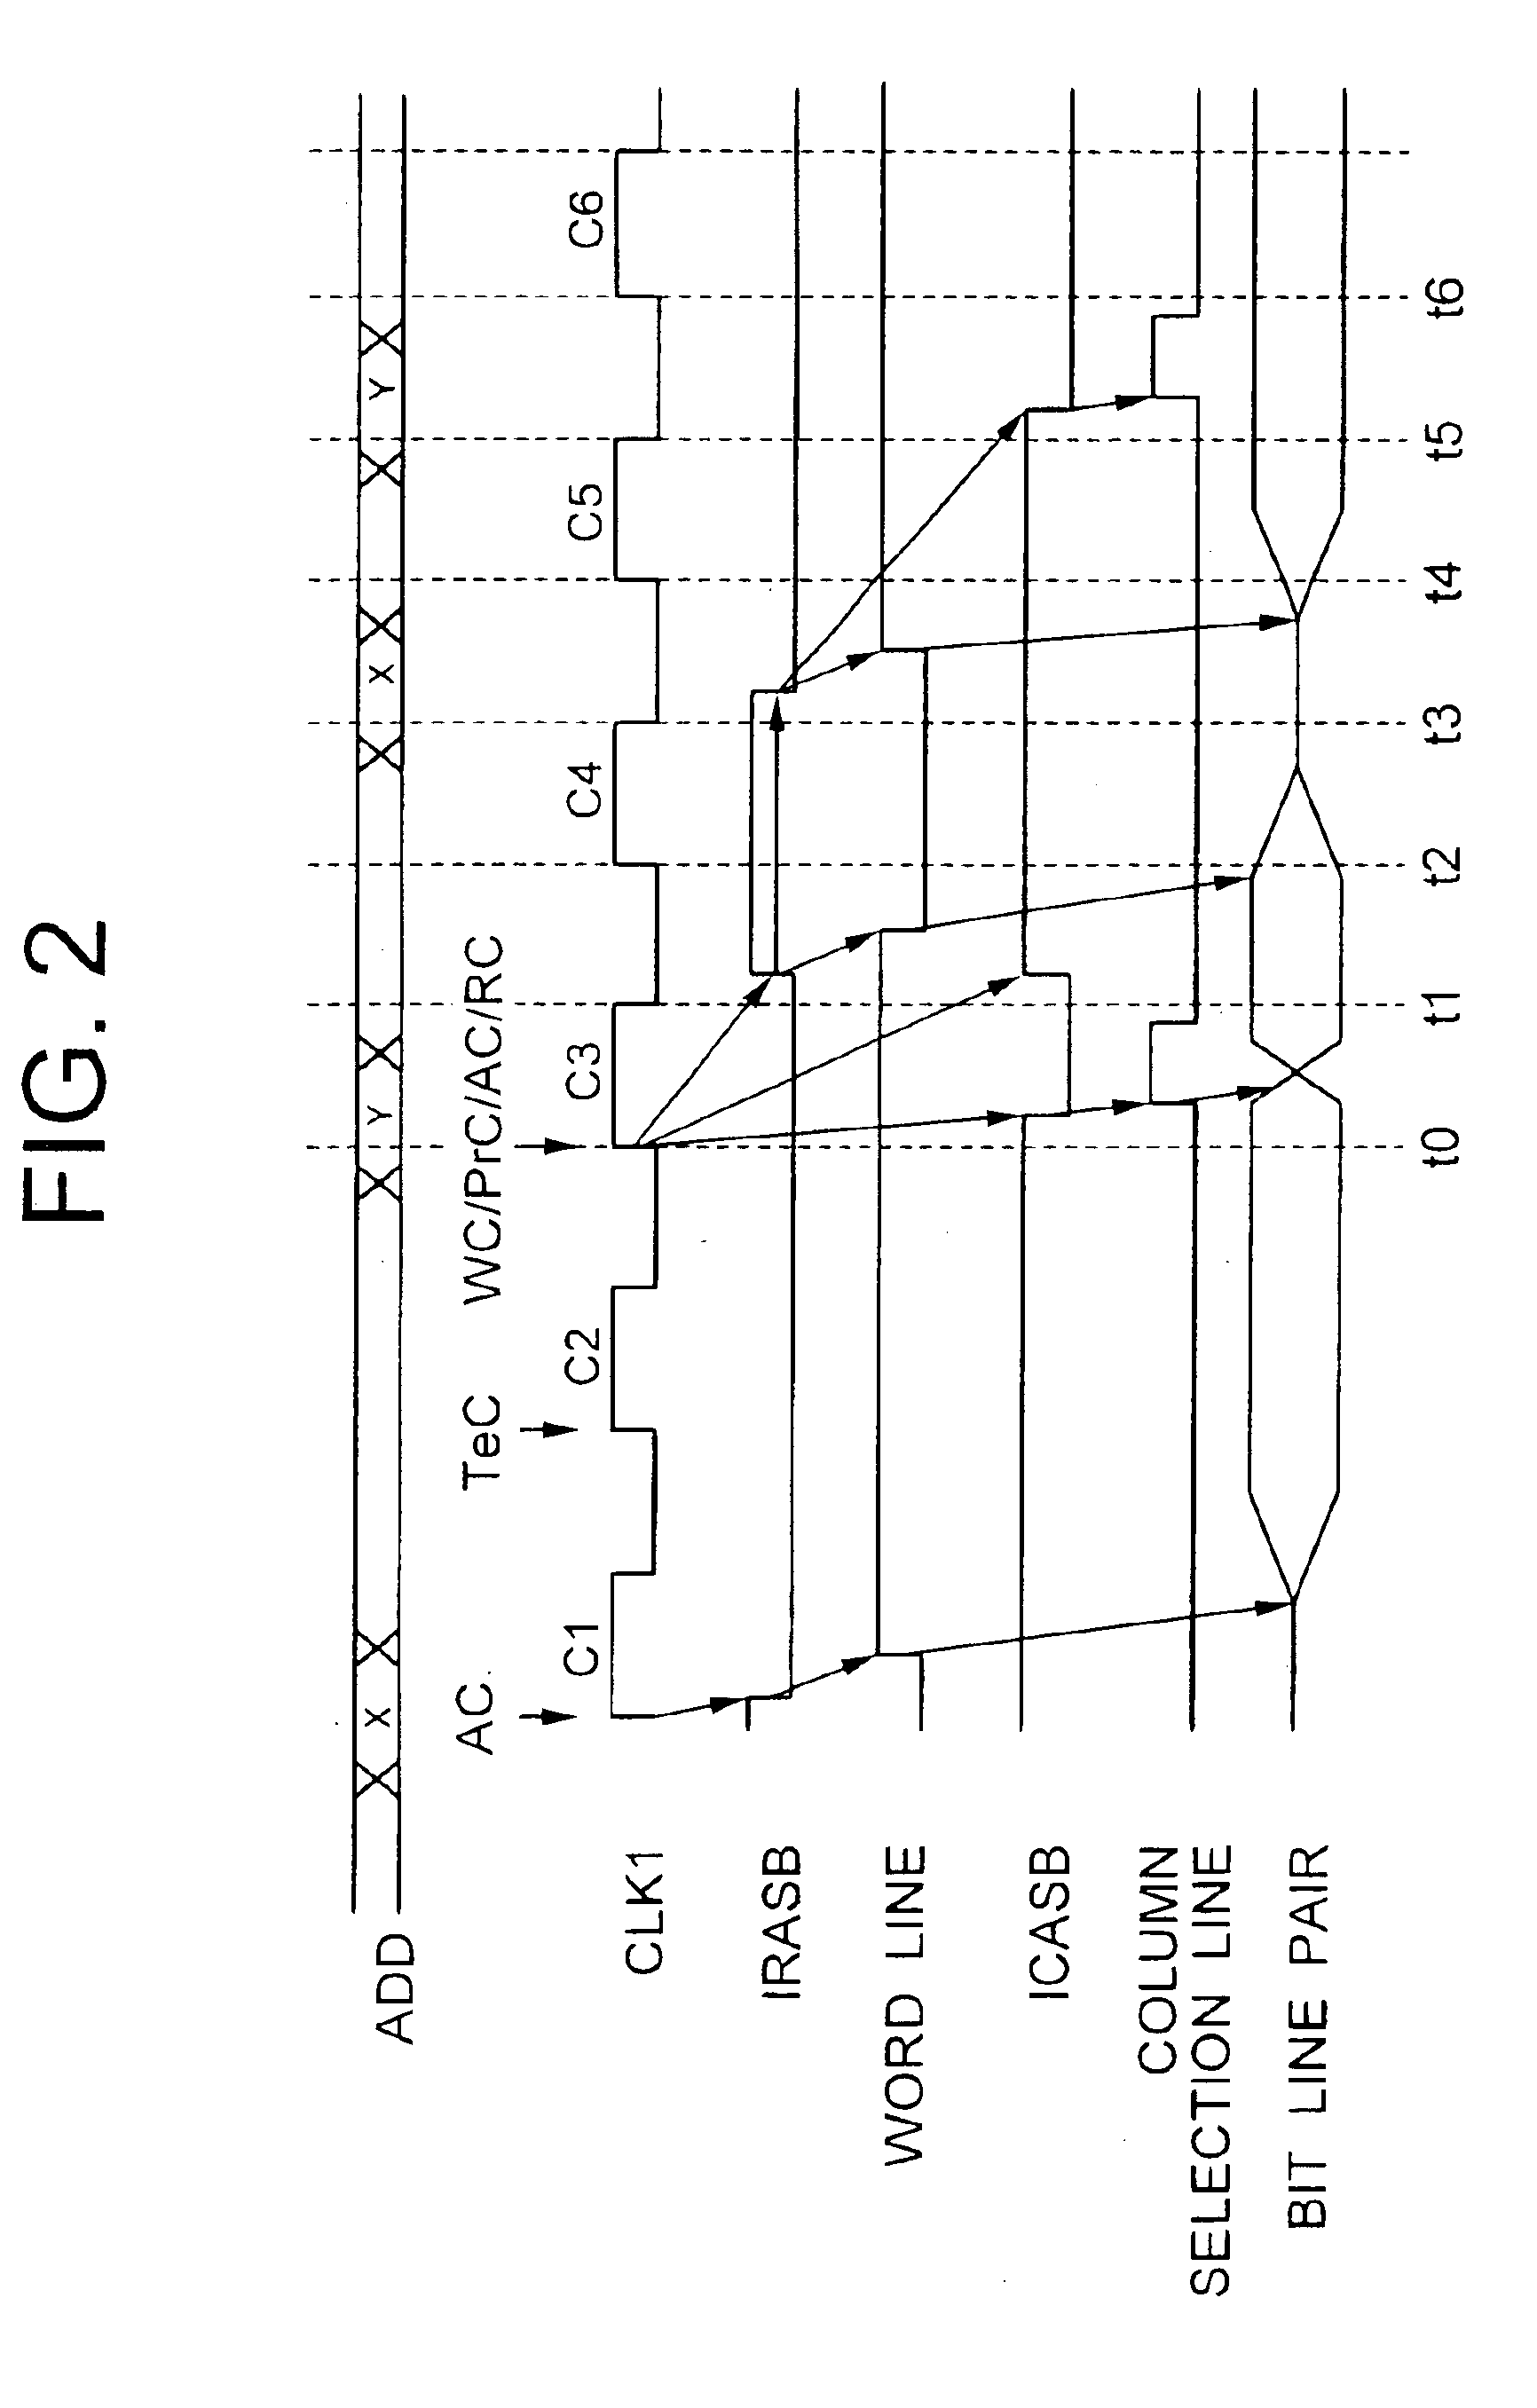 Synchronous semiconductor memory device having a desired-speed test mode